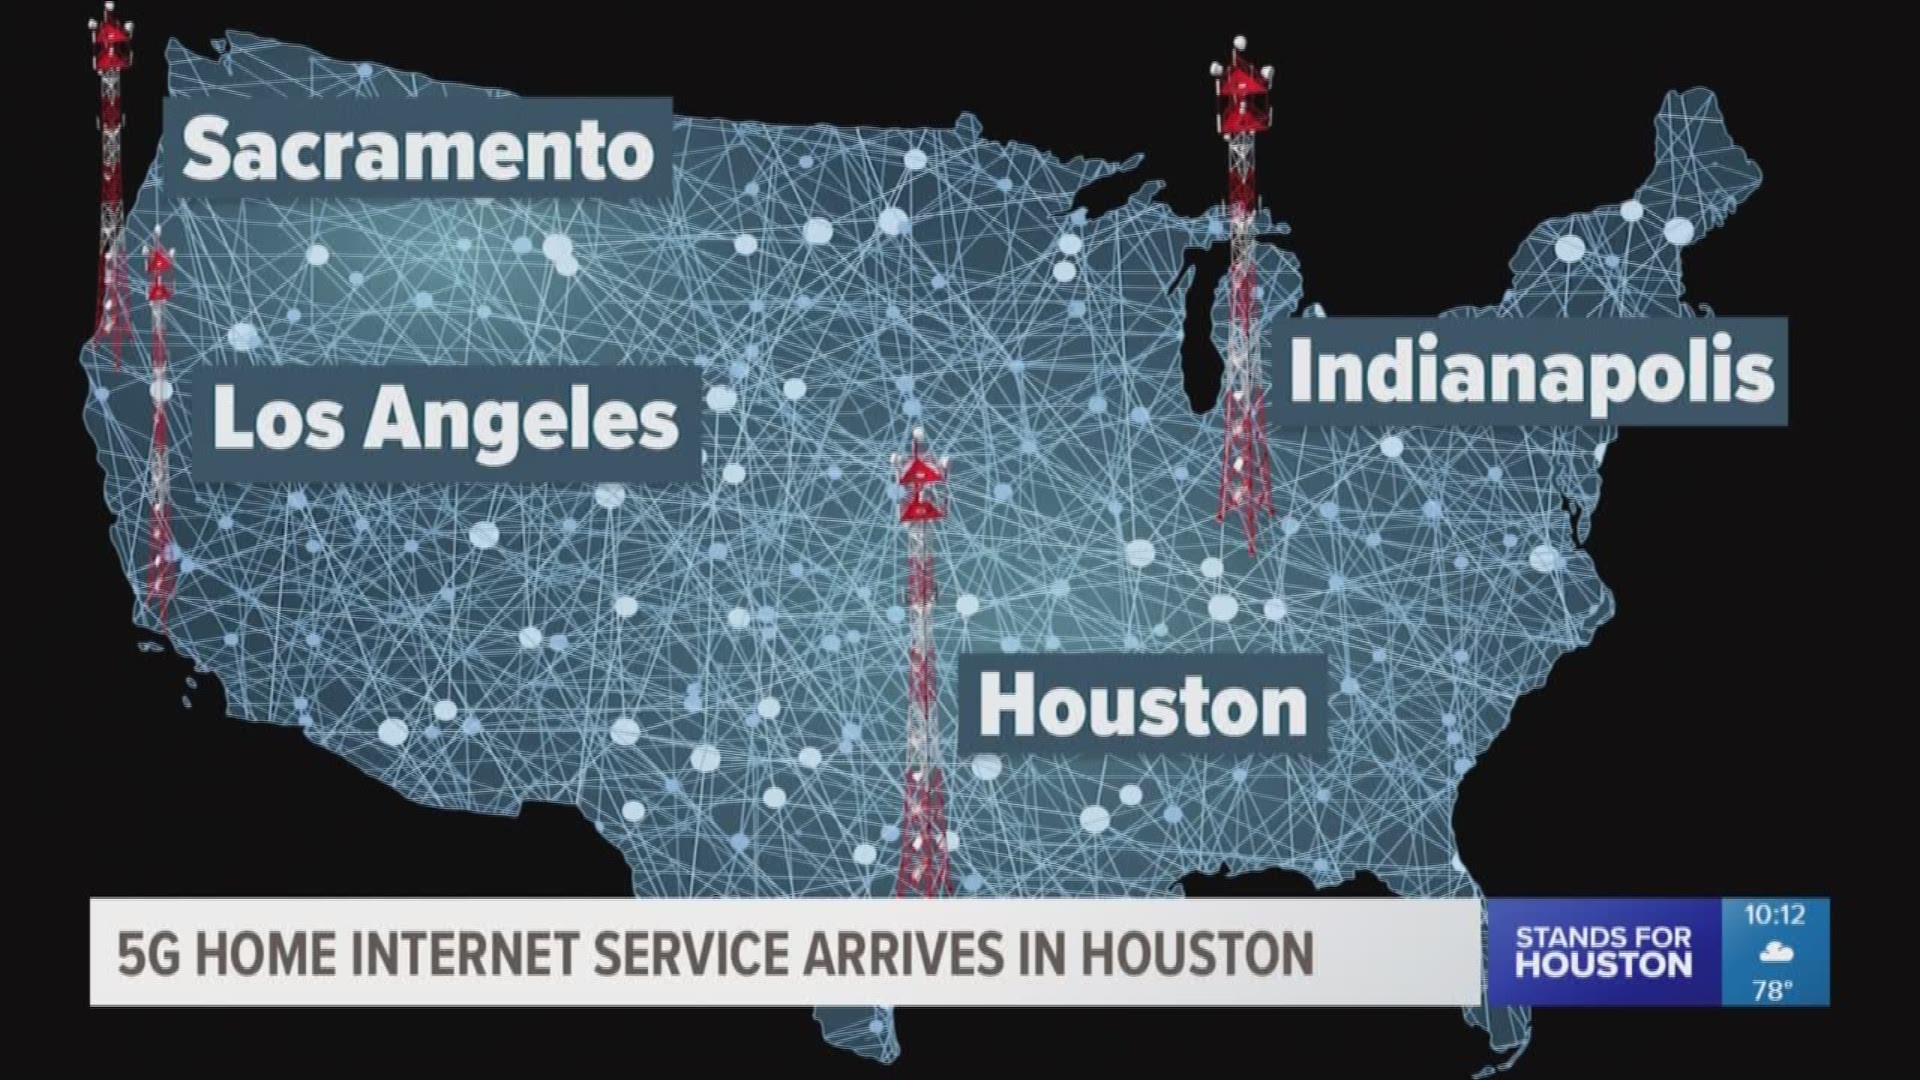 Houston is one of only four cities, along with L.A., Sacramento and Indianapolis, in Verizon's 5G rollout.